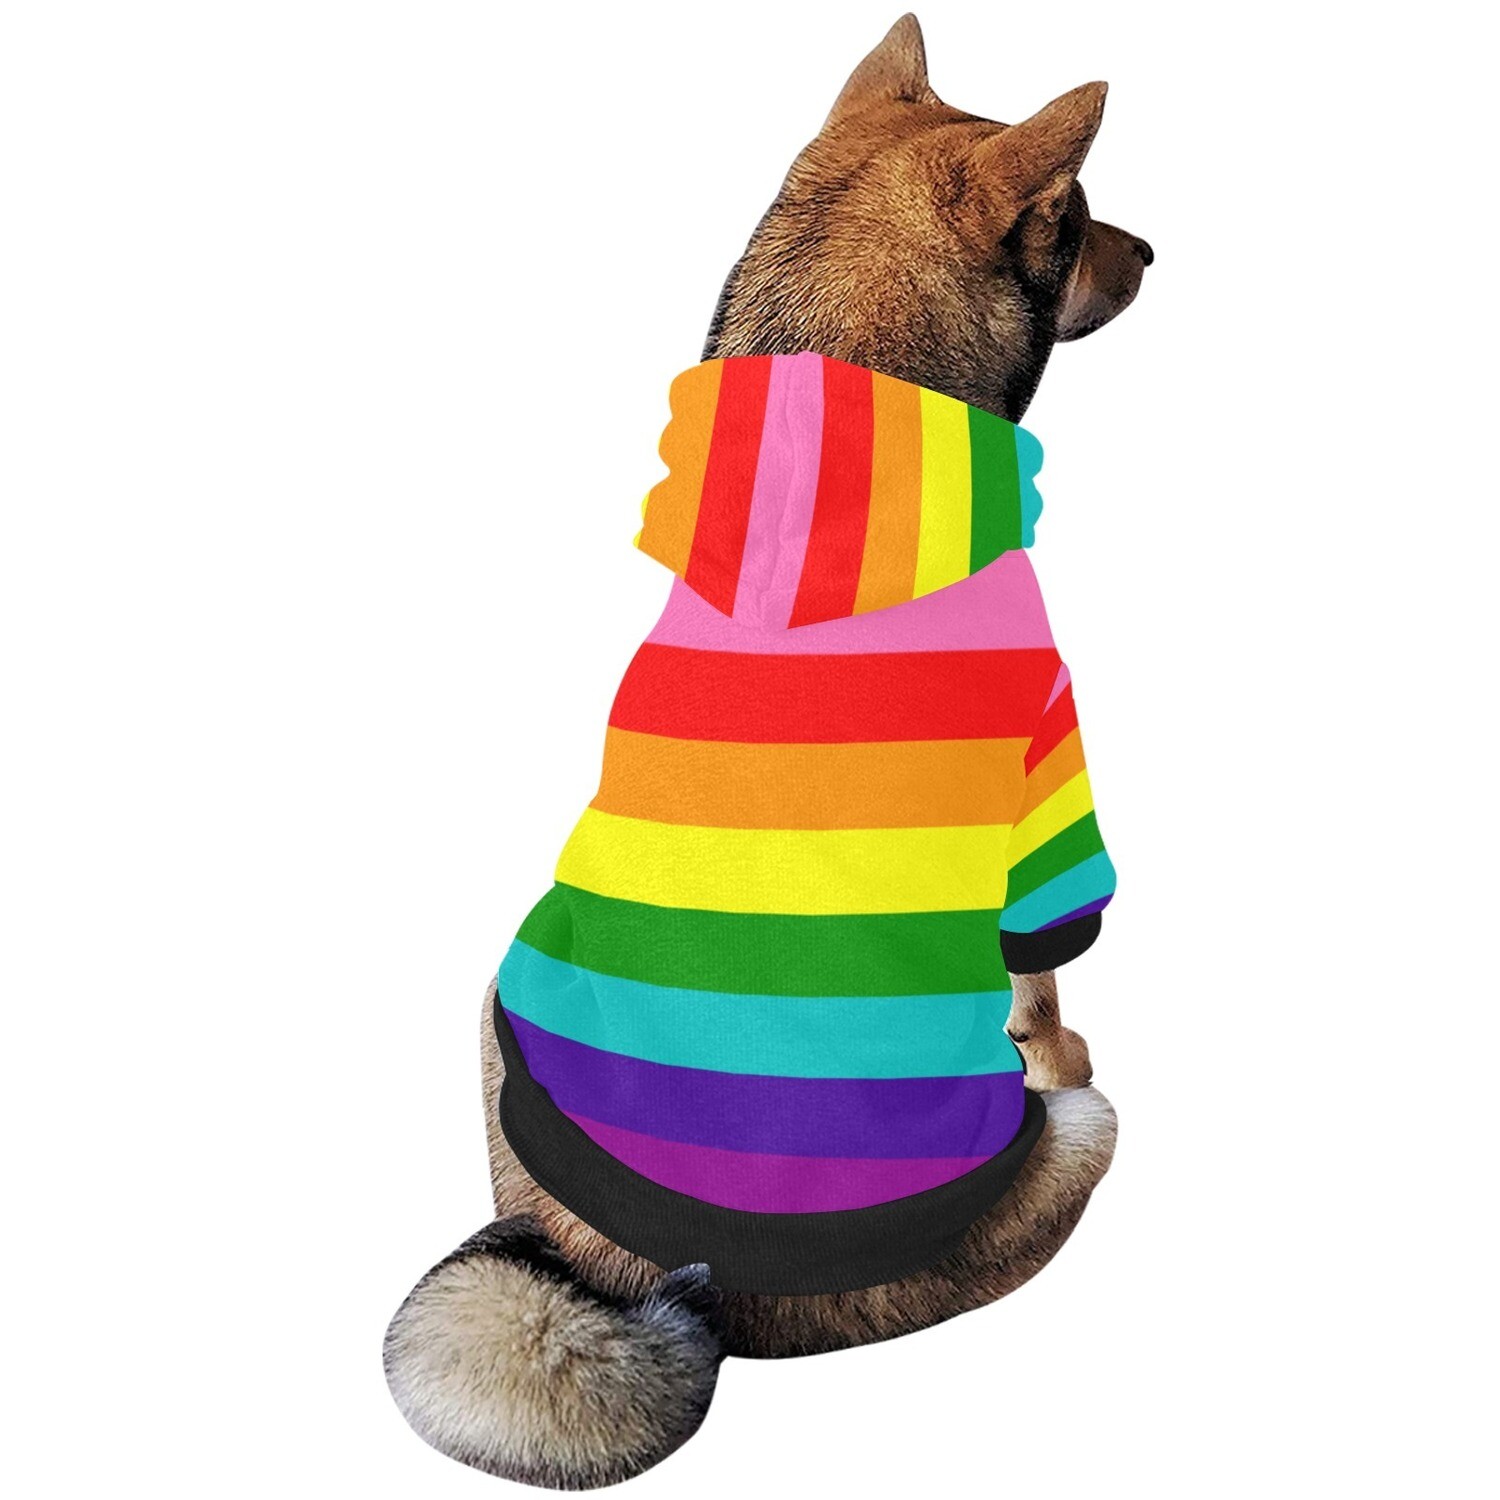 🐕🏳️‍🌈 Love is Love Buttoned Hoodie, Dog clothes, Dog clothing, Gift, 6 sizes XS to 2XL, LGBTQ, pride flag, rainbow flag, LGBT, Dog gift, Gift for dogs